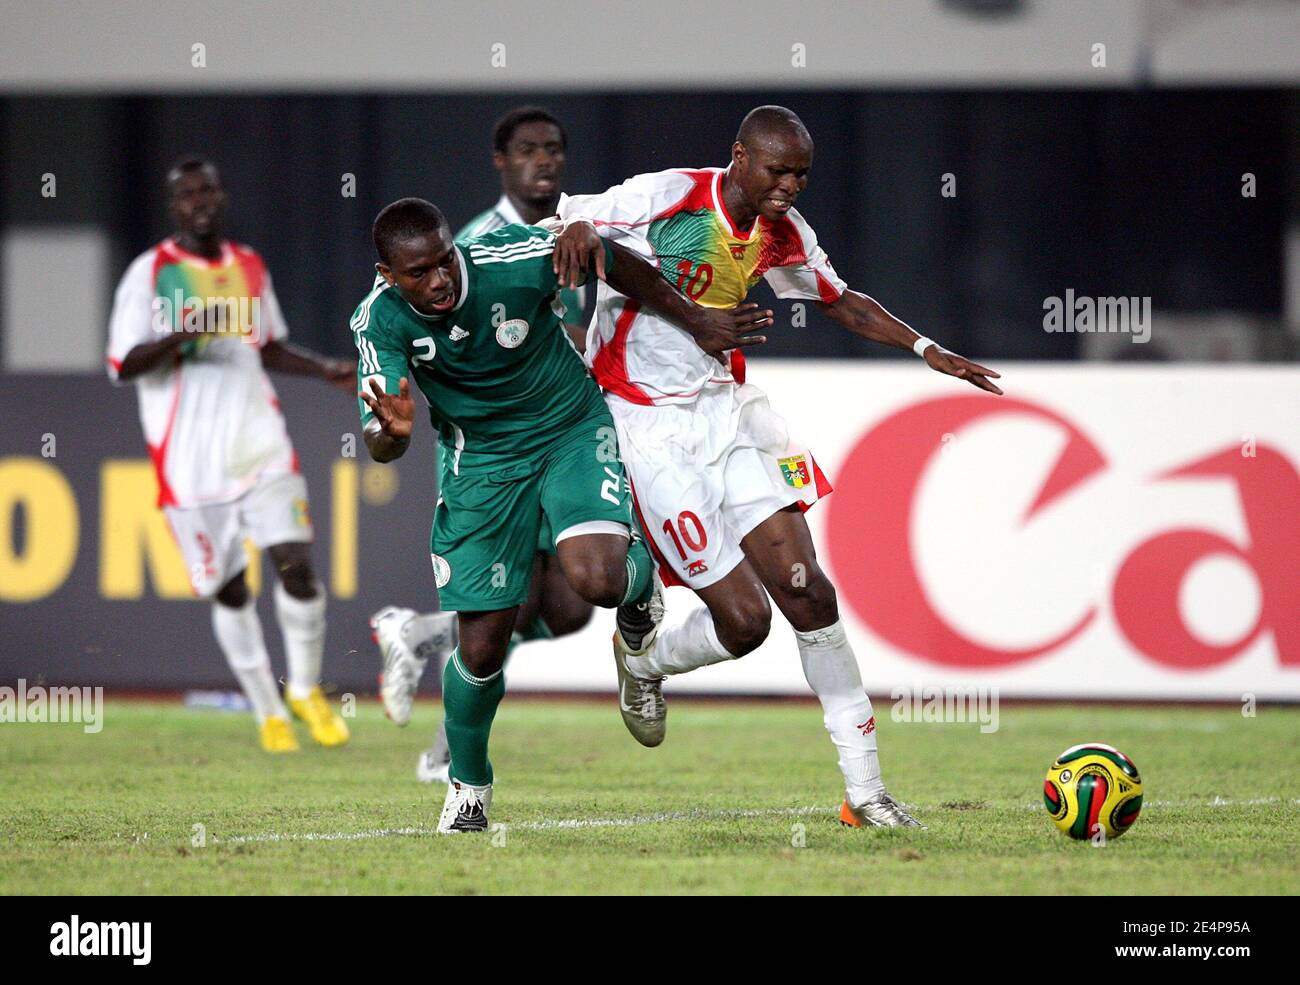 Mali's Dramane Traore and Nigeria's Joseph Yobo battle for the ball during the African Cup of Nations soccer match, Ivory Nigeria vs Mali in Sekondi, Ghana on January 25, 2008. The match ended in a 0-0 draw. The future of German coach Berti Vogts will be discussed by the board of the Nigeria Football Association (NFA) after the Super Eagles failed to beat Mali in a decisive Group B match and now risk a first round elimination from the 2008 Africa Cup of Nations.Photo by Steeve McMay/Cameleon/ABACAPRESS.COM Stock Photo